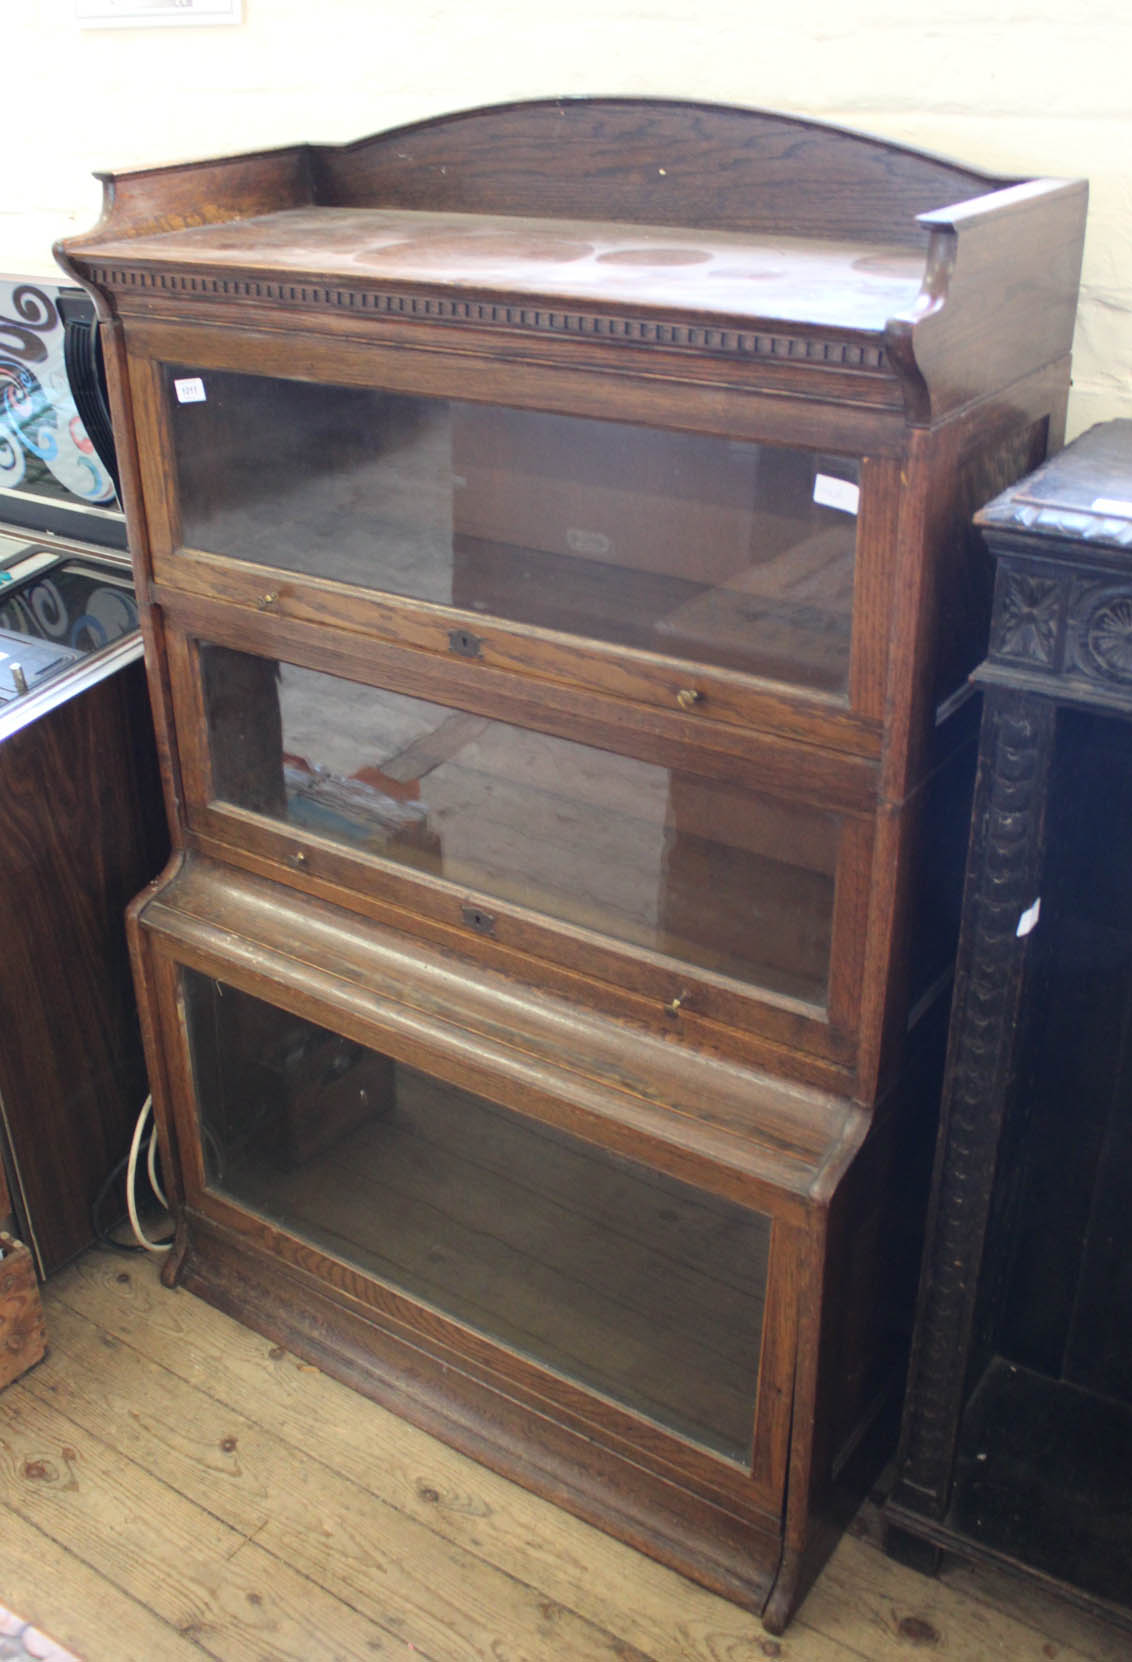 A three tier Lebus sectional glazed bookcase